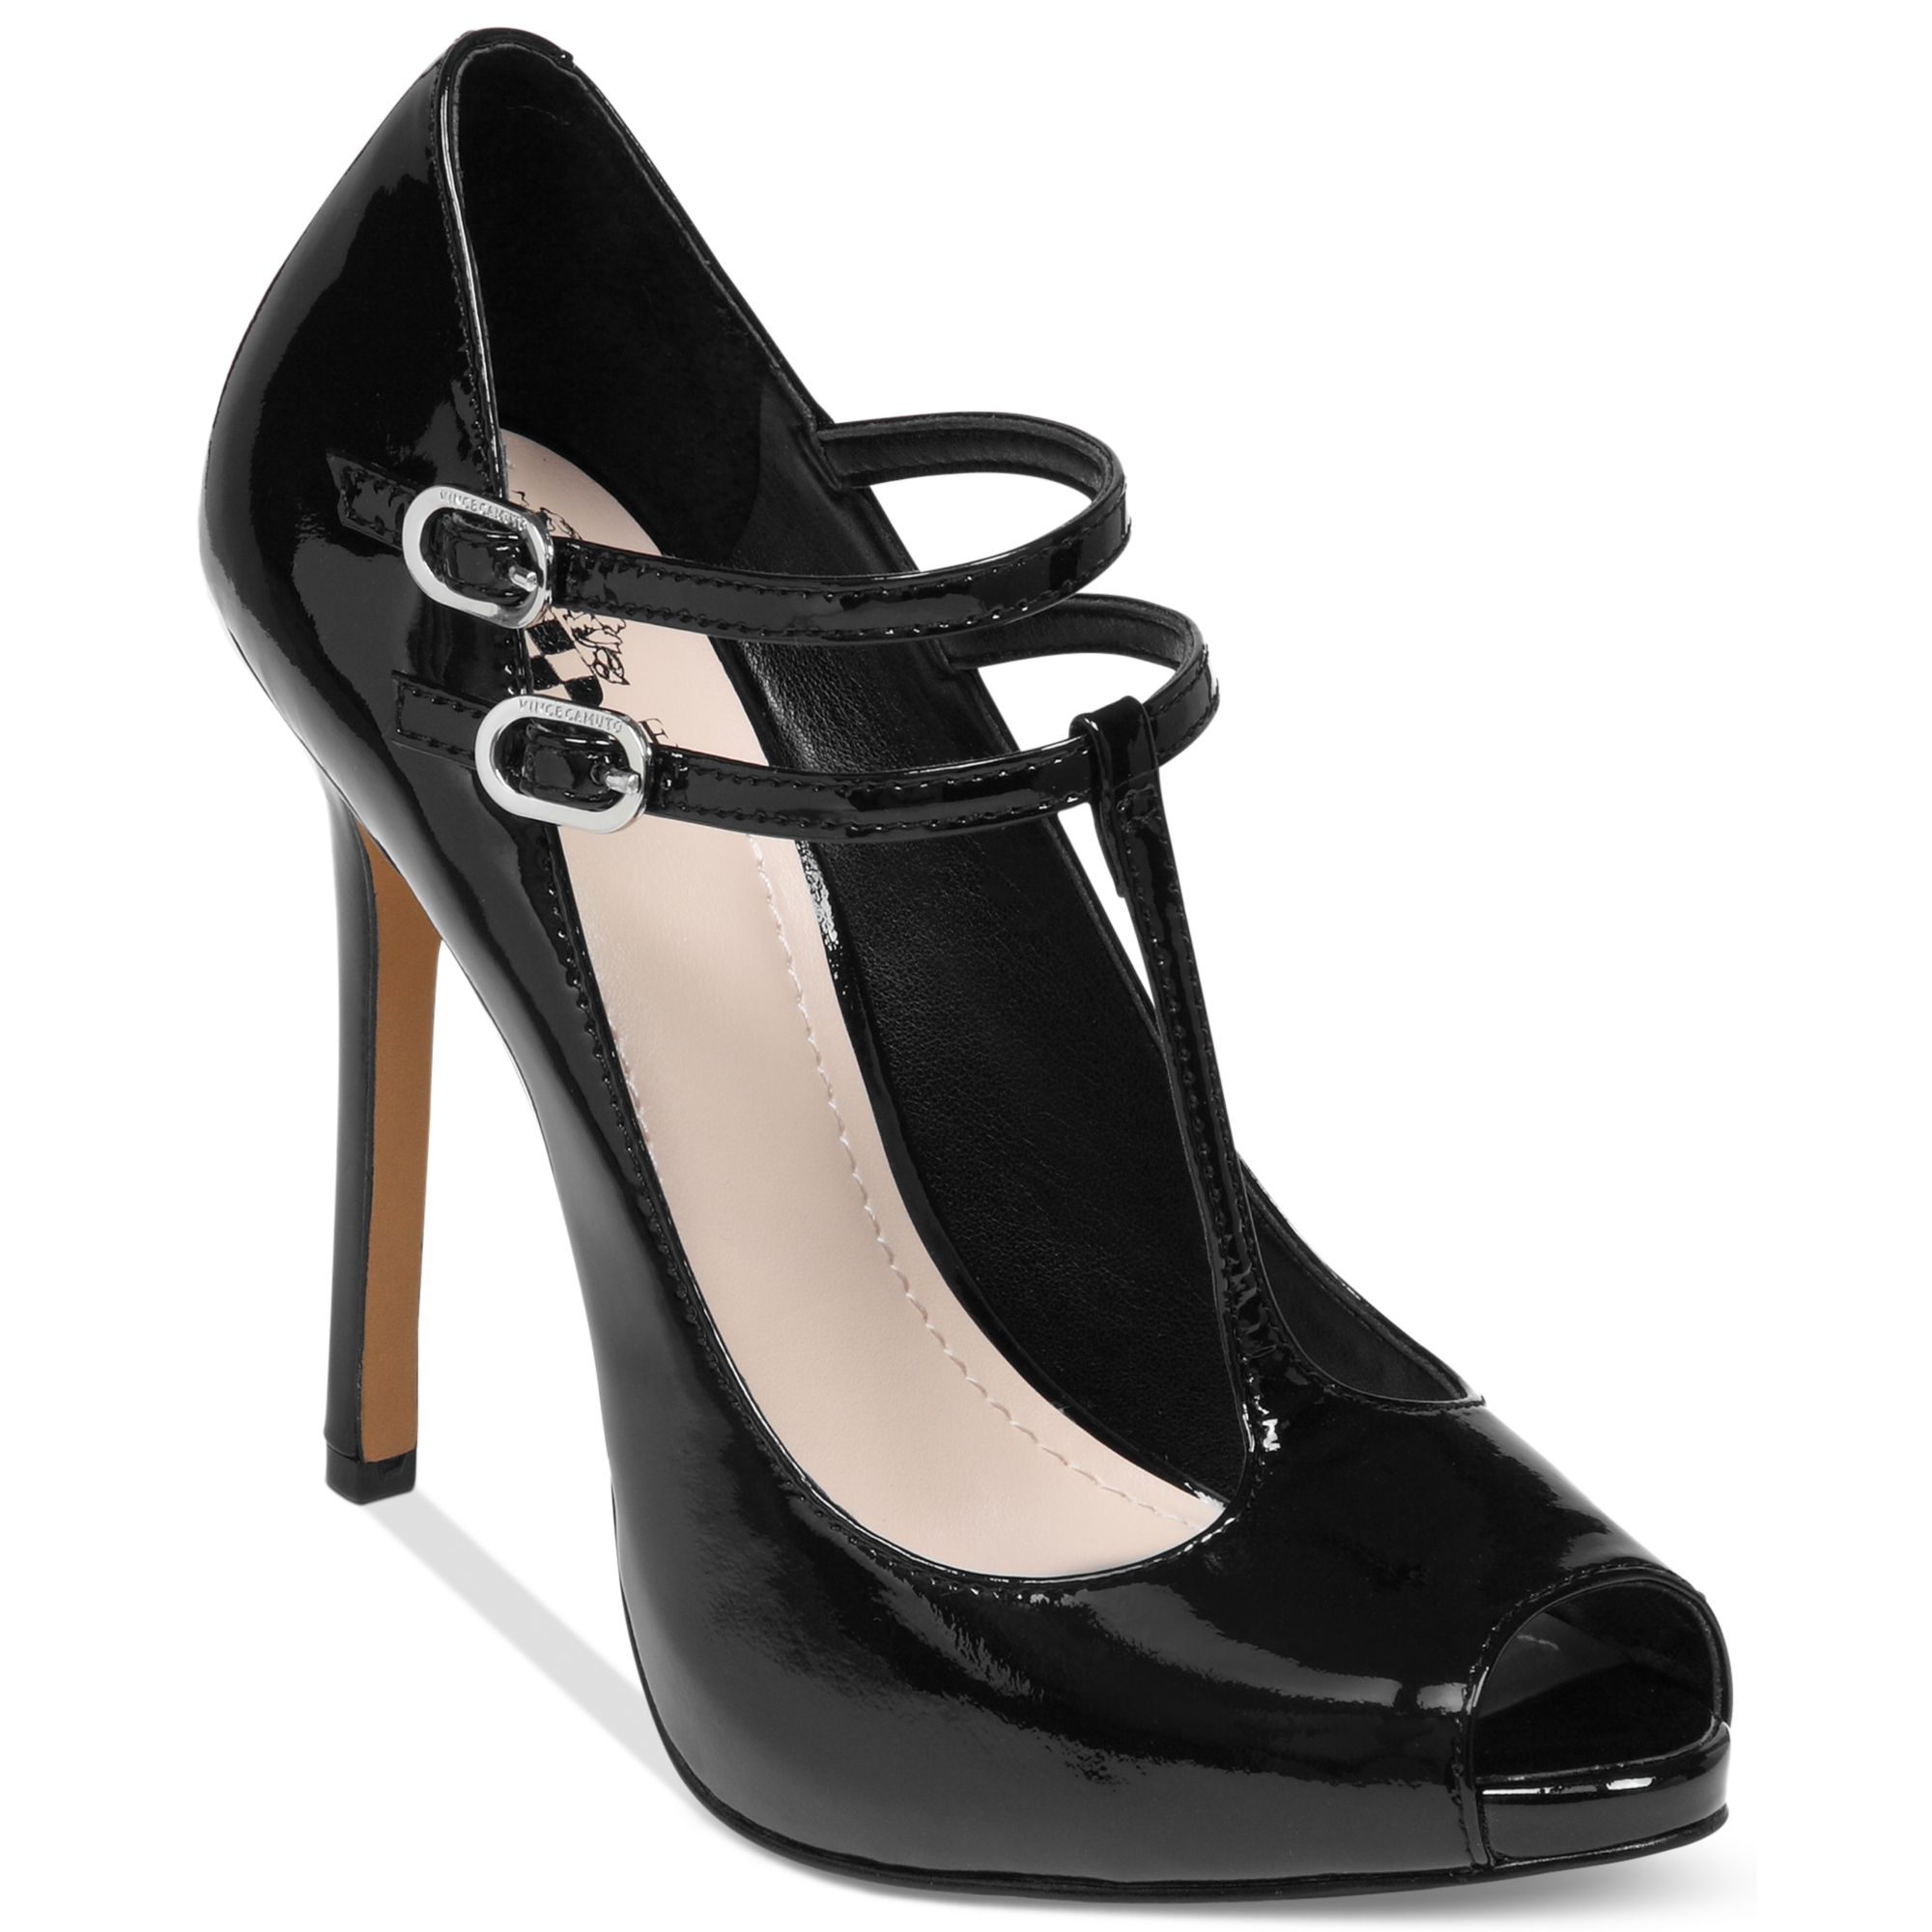 Lyst - Vince Camuto Carlii Tstrap Mary Jane Pumps in Black